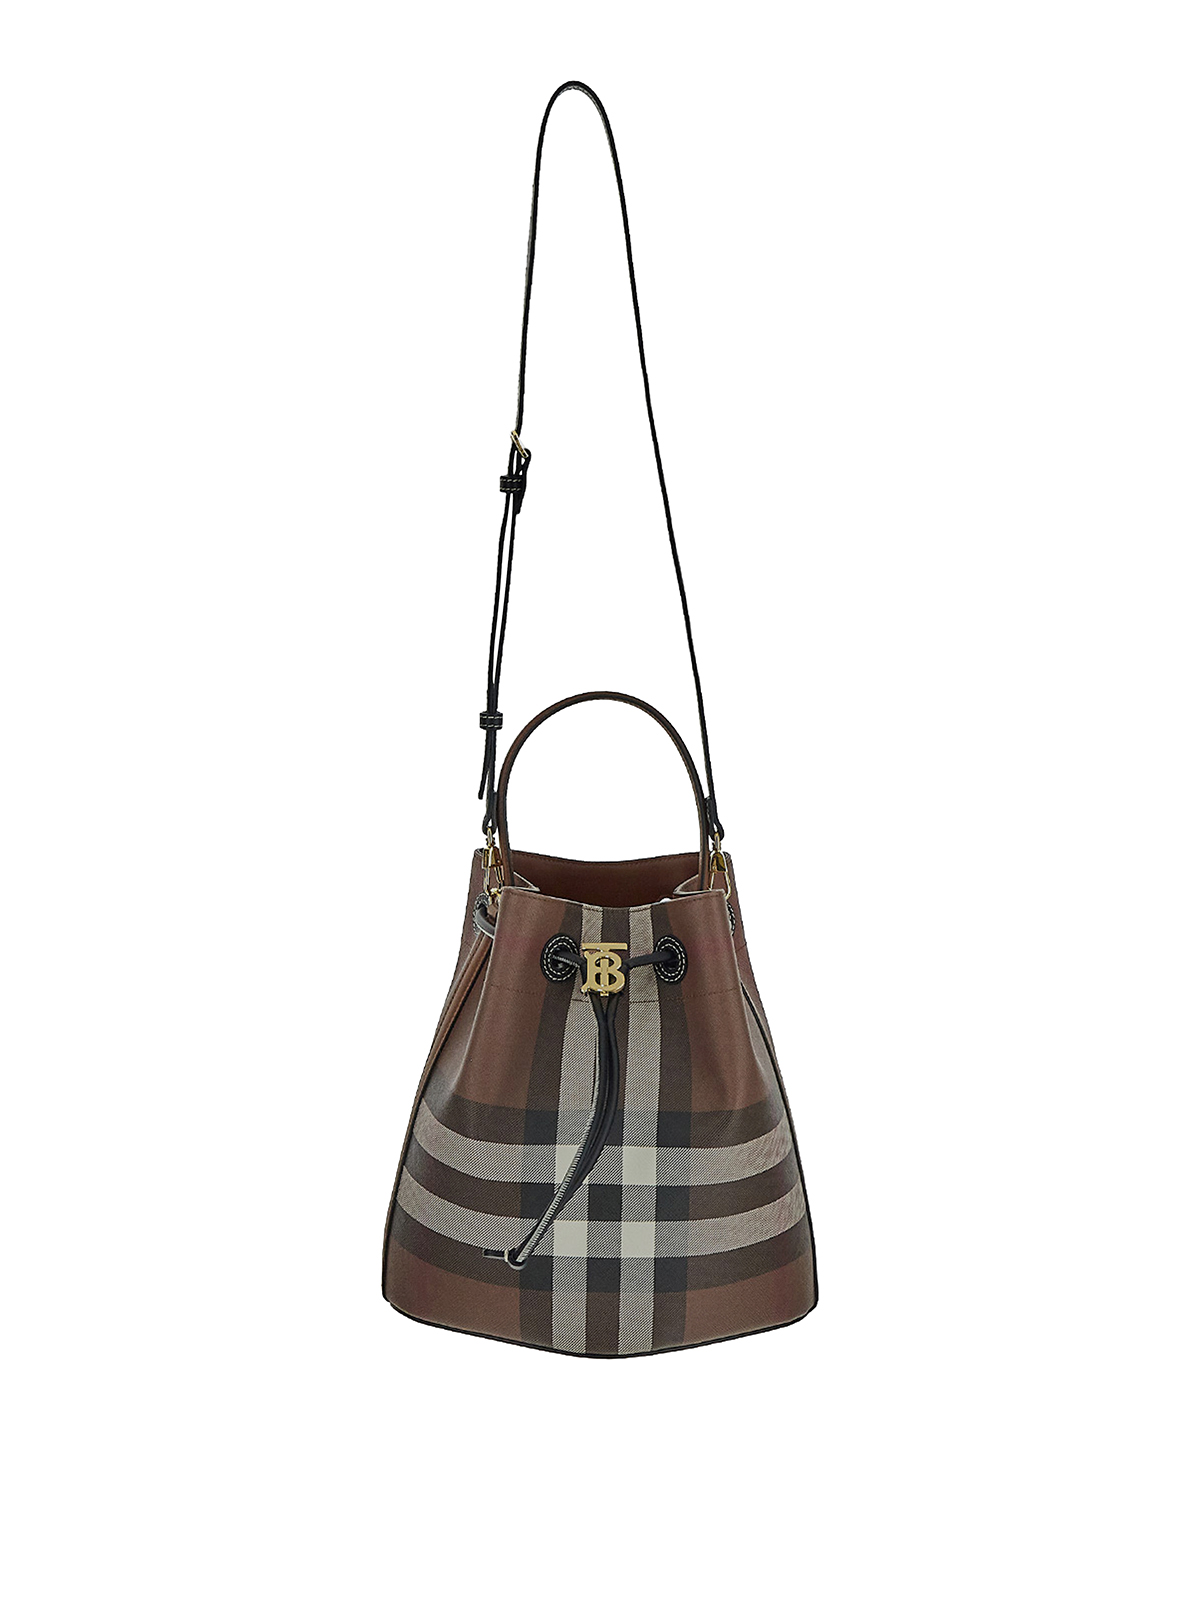 Burberry Tote In Brown